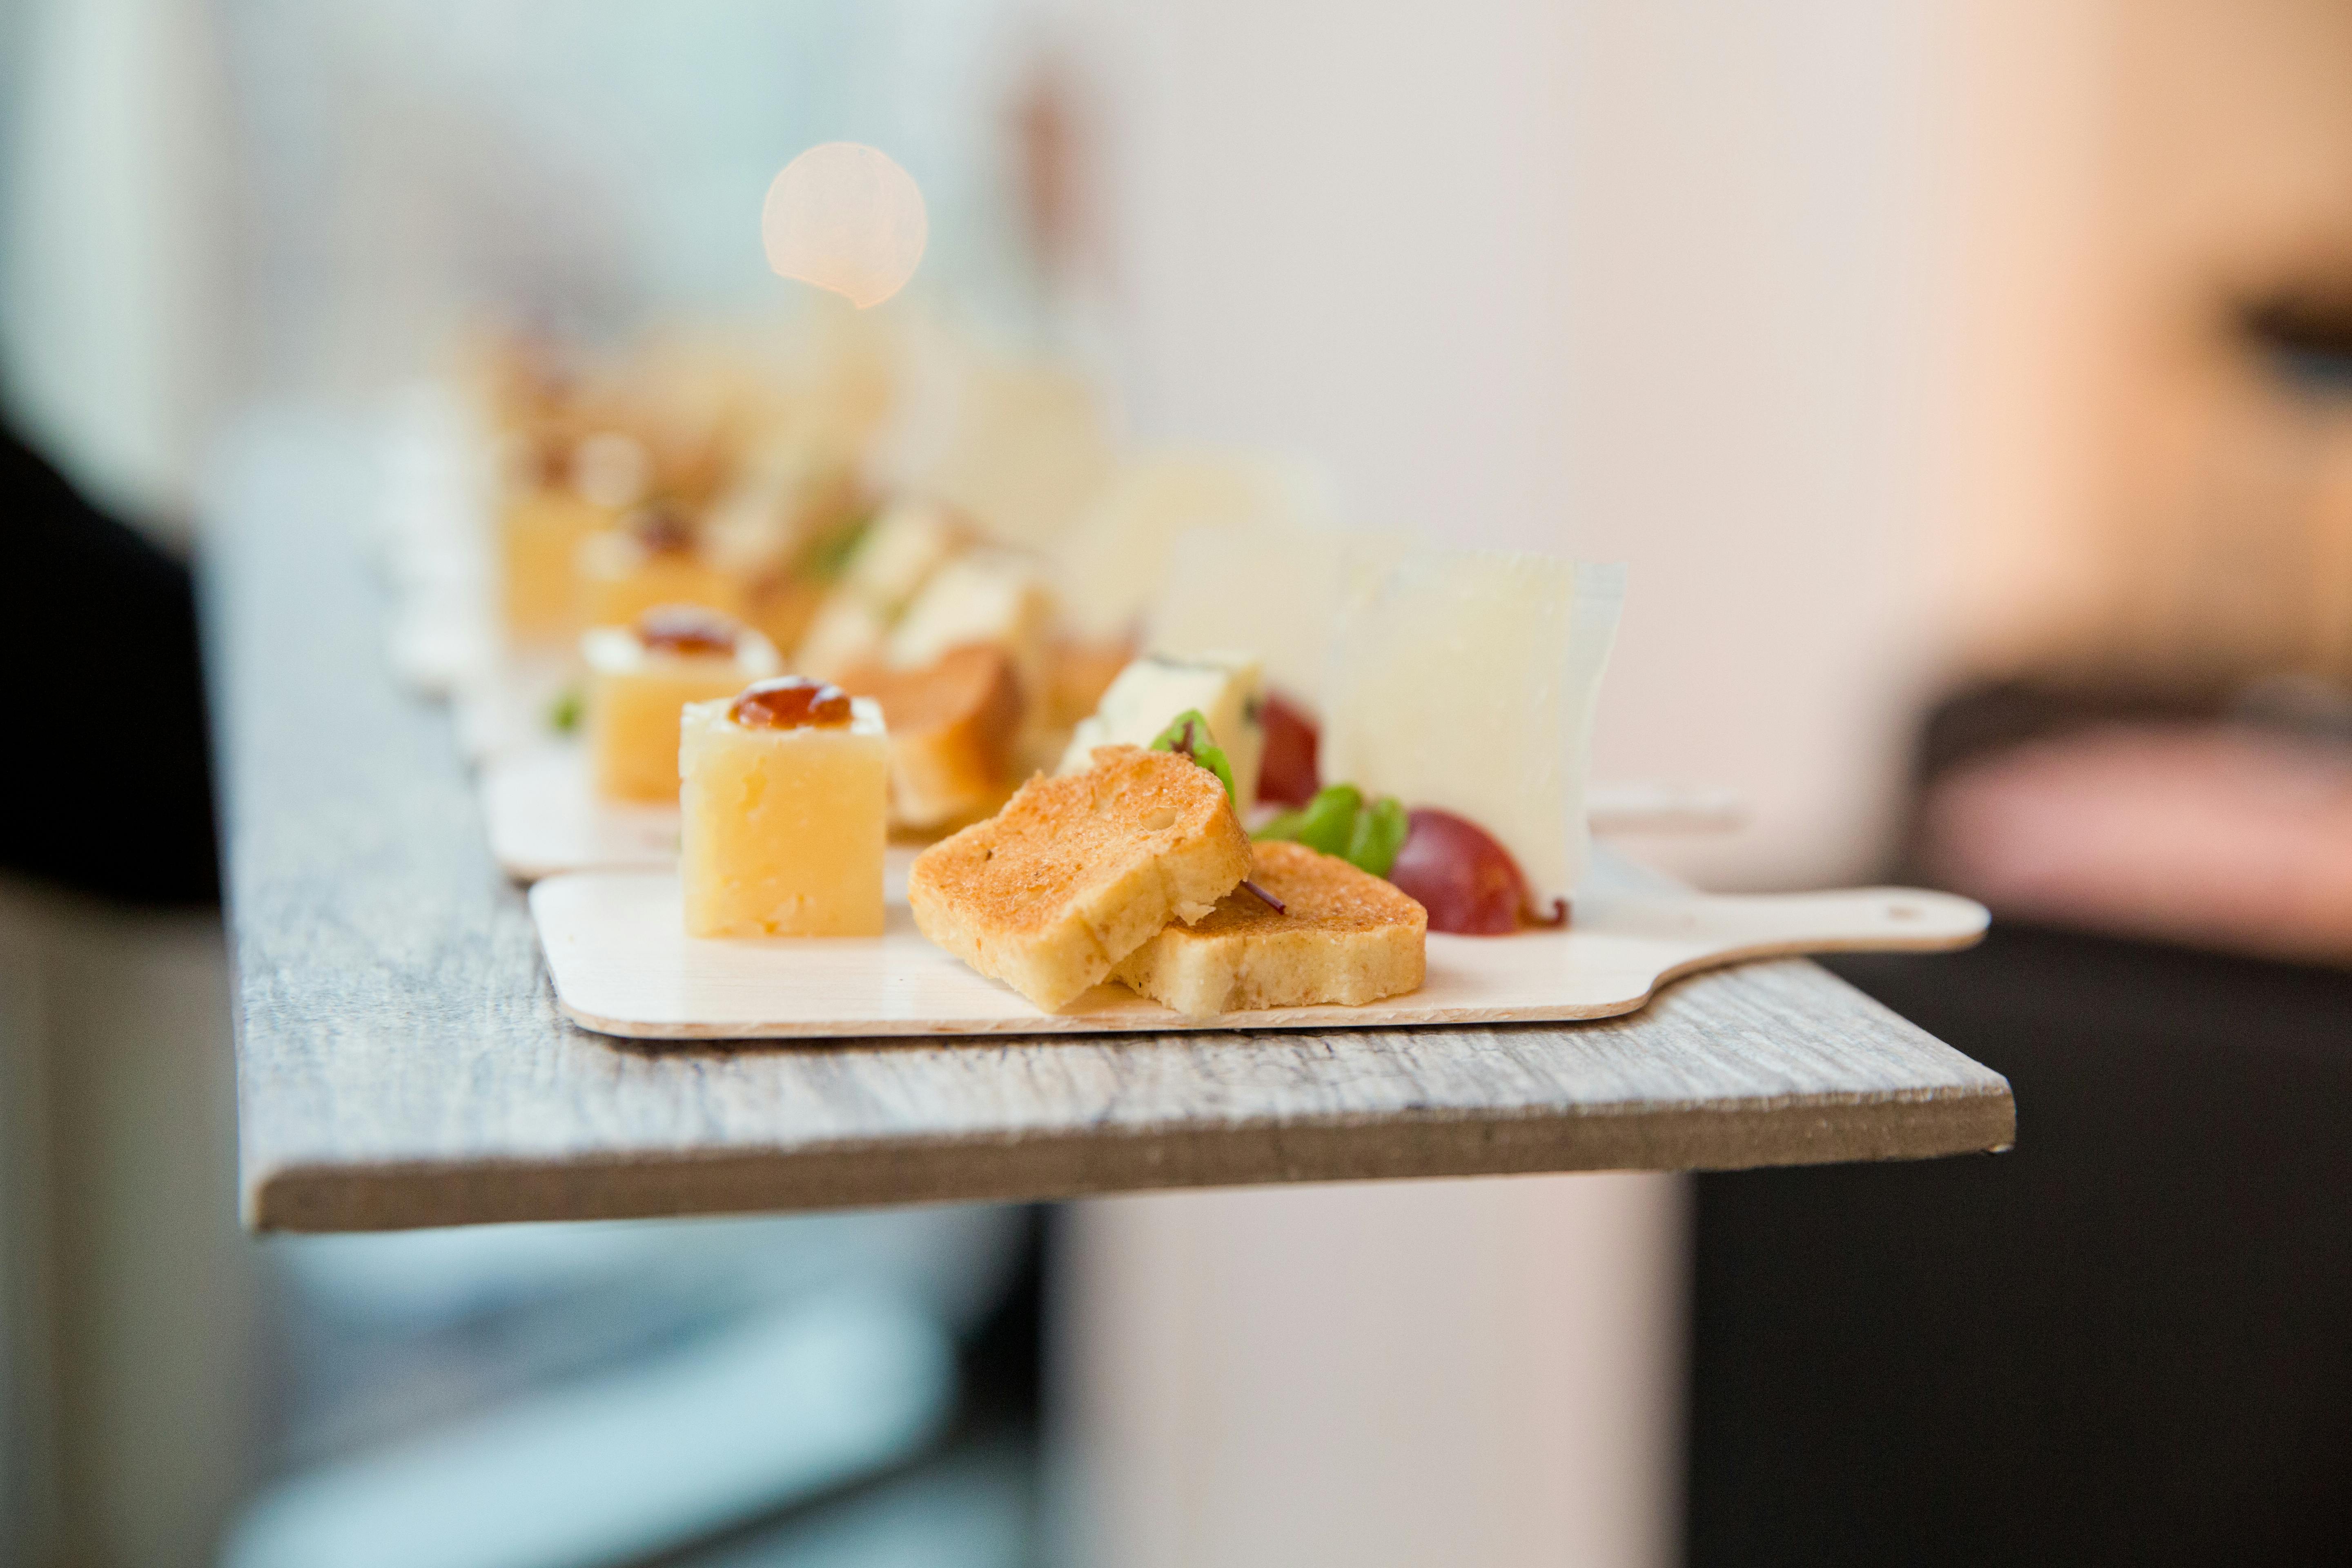 Networking Mixer at Glasshouse Chelsea in New York With Mini Charcuterie Boards | PartySlate